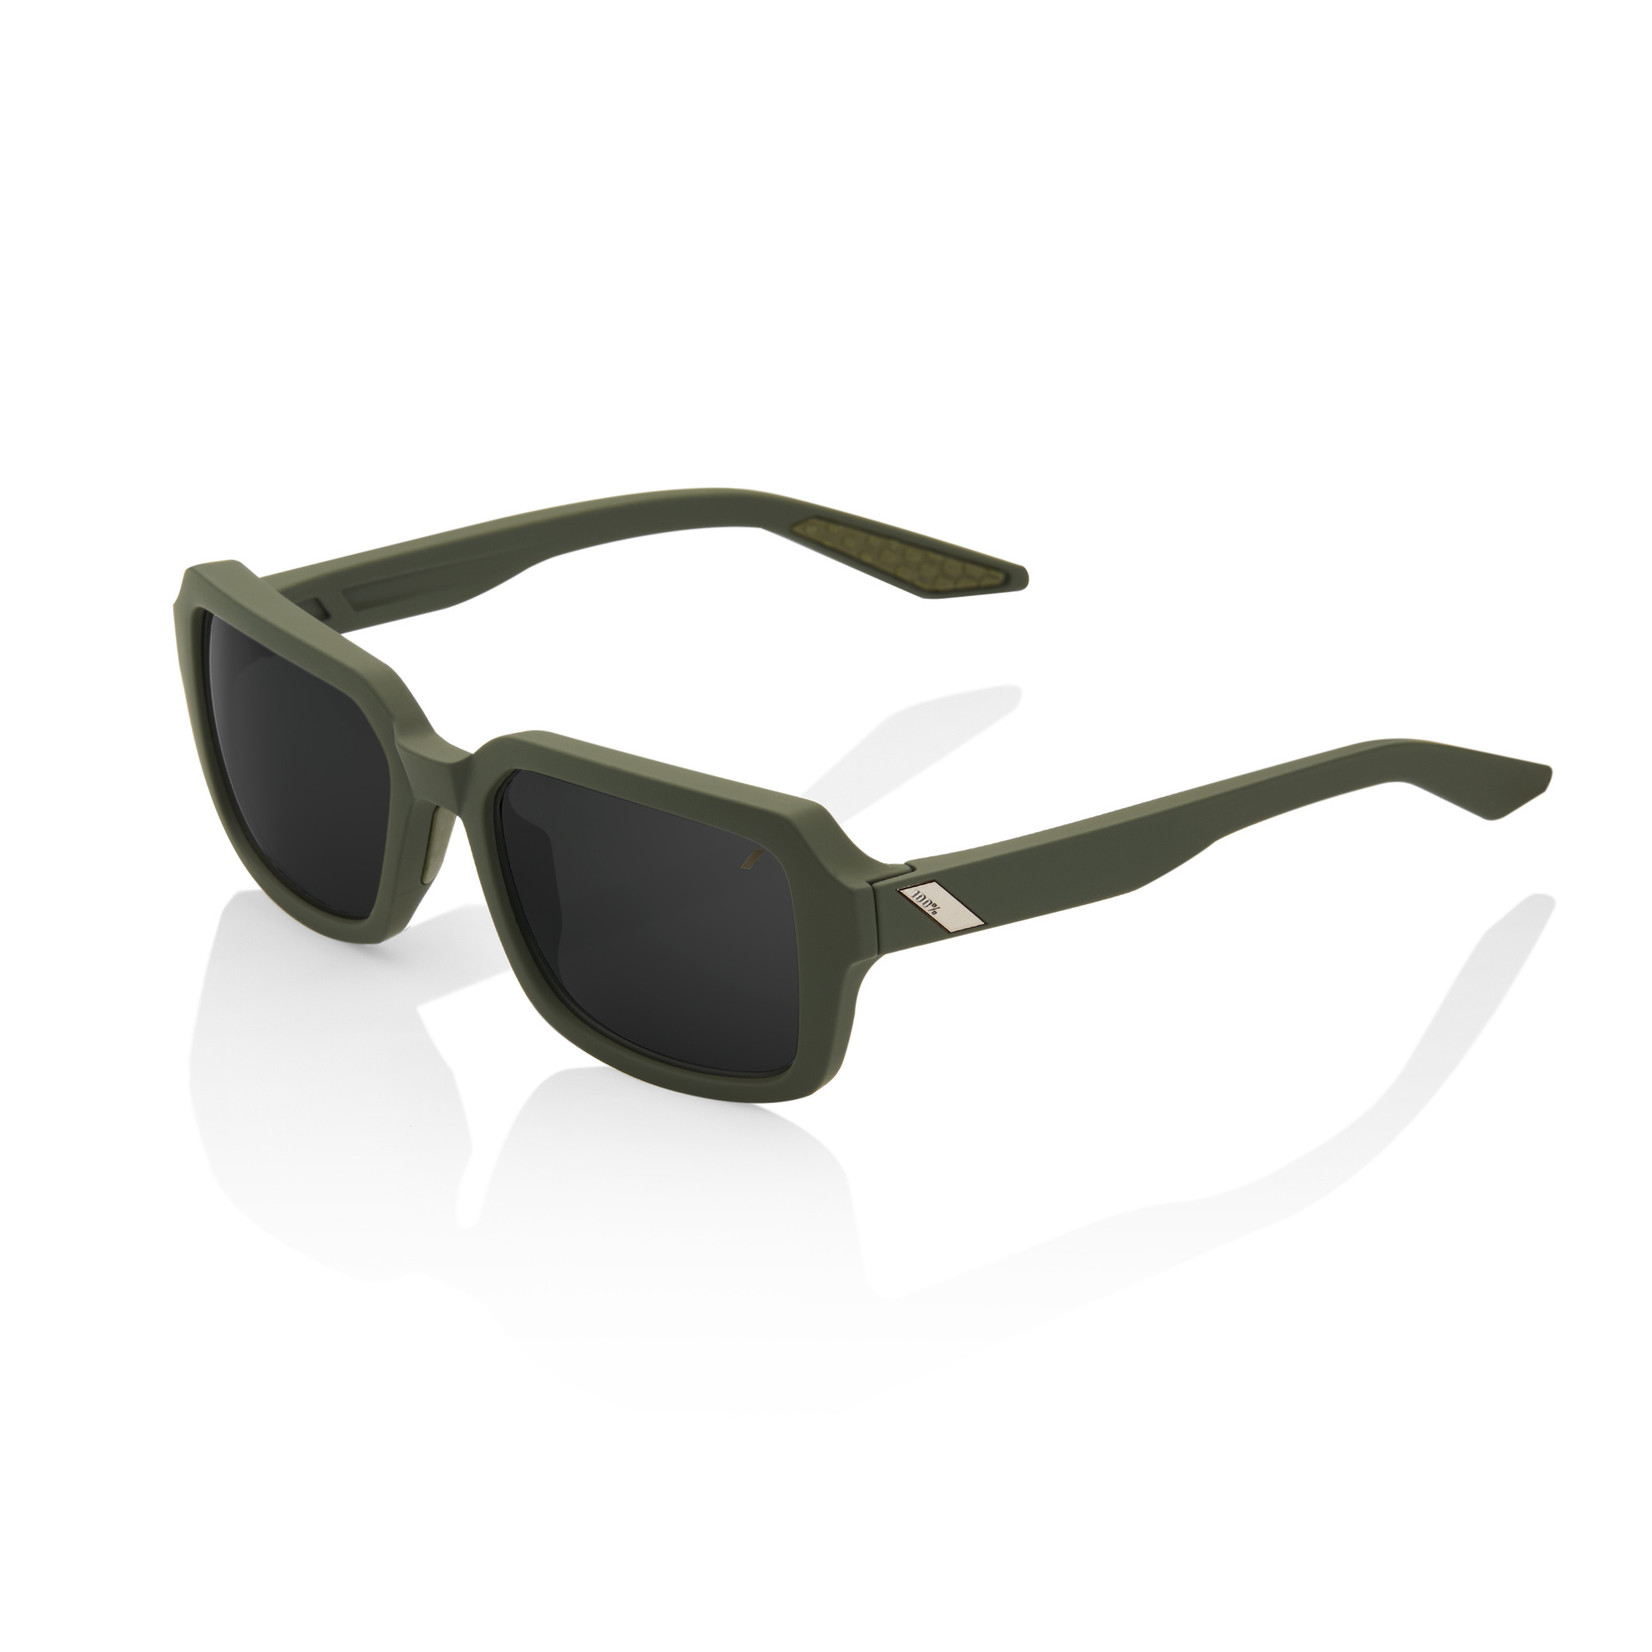 1 100% Ridely Bike Sunglasses Soft Tact Army Green - Black Mirror